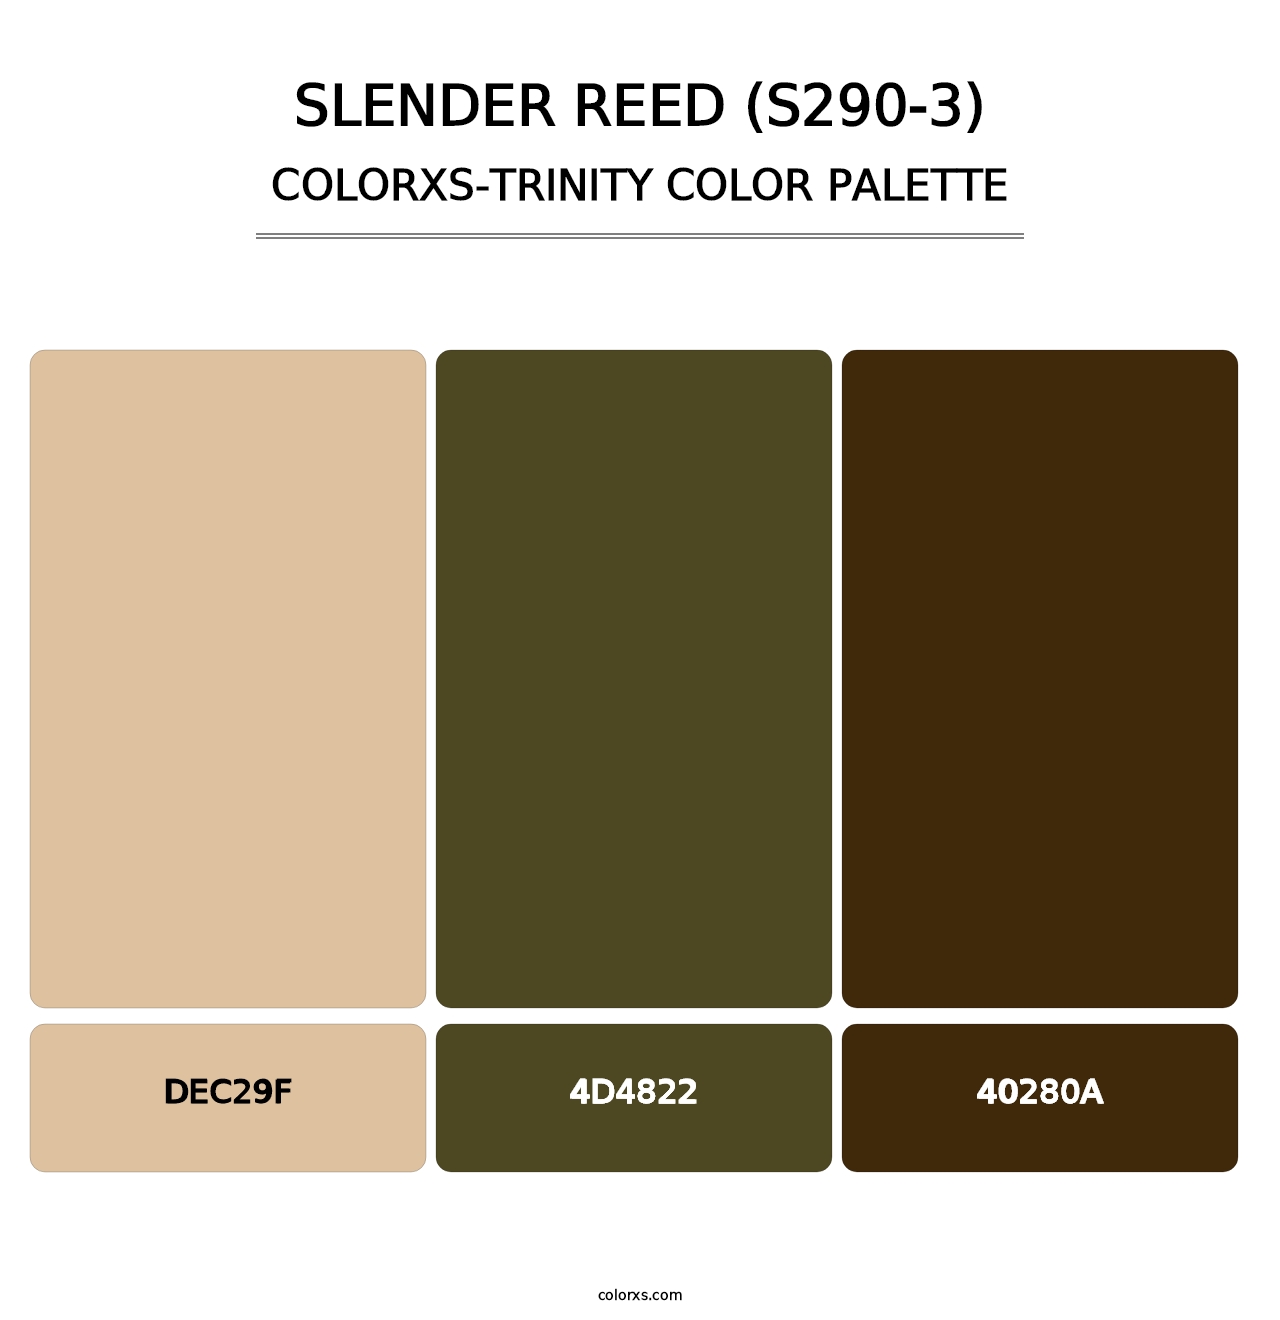 Slender Reed (S290-3) - Colorxs Trinity Palette